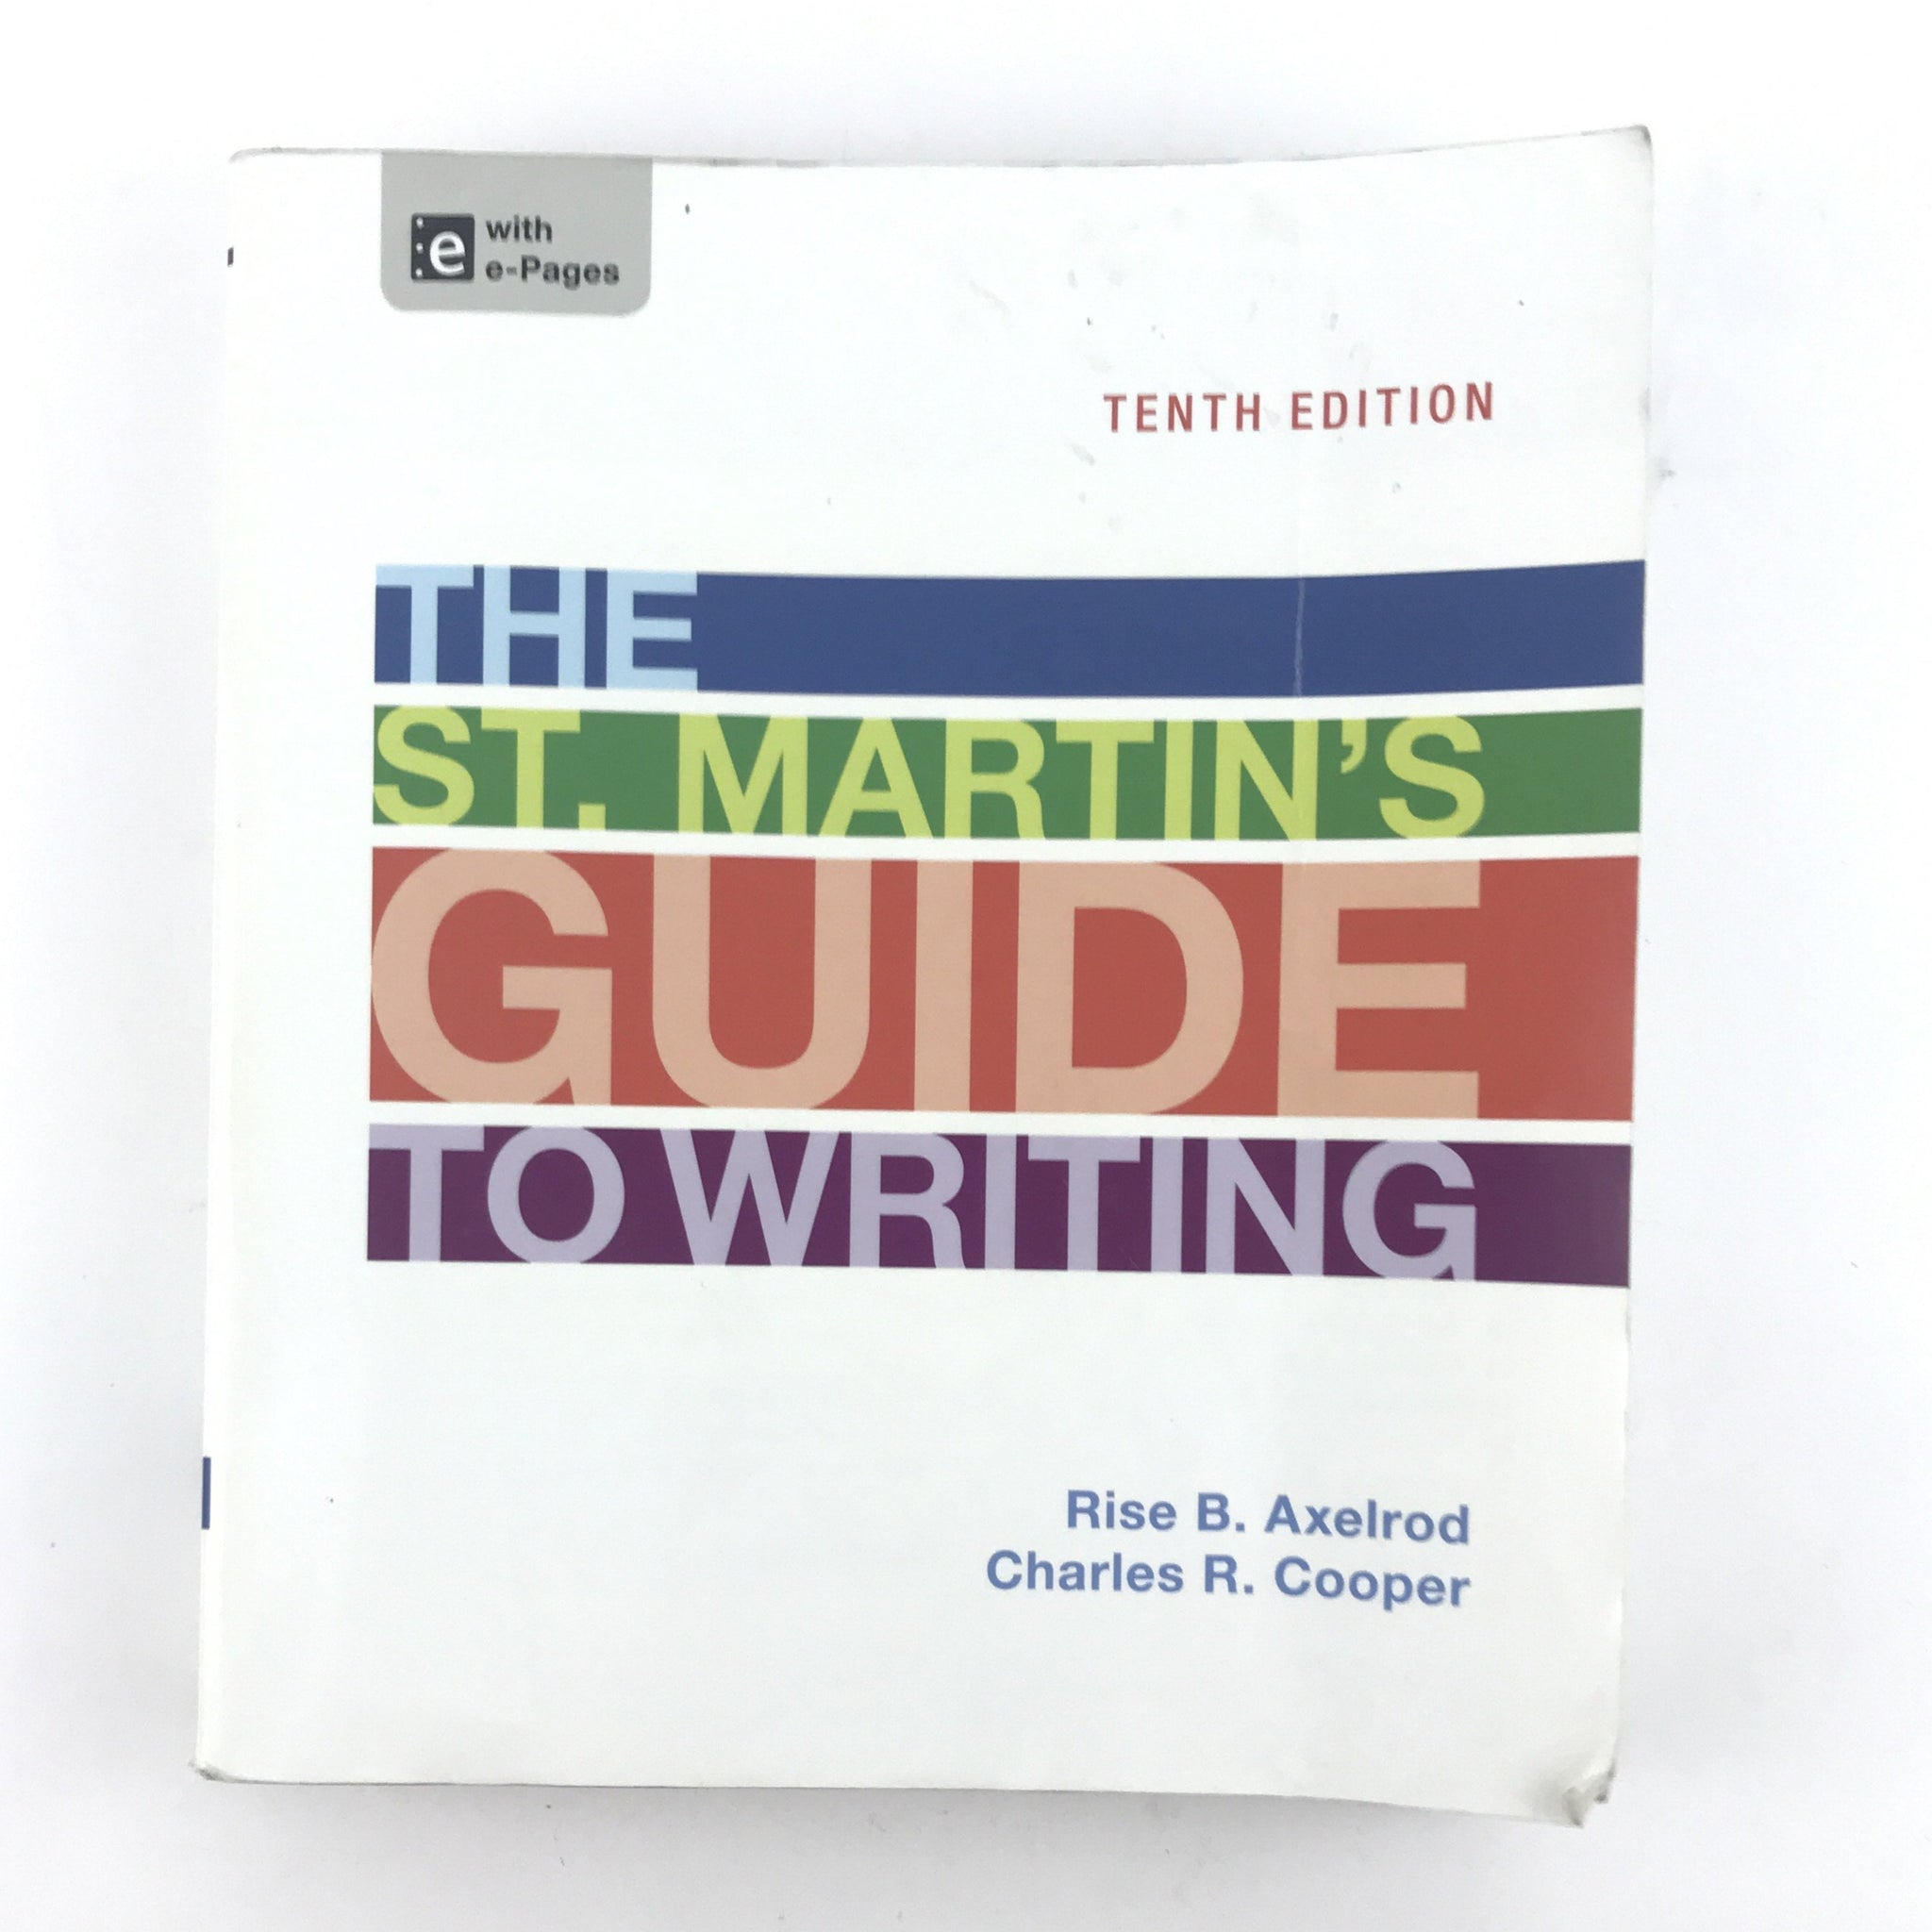 The St. Martins Guide To Writing by Axelrod, Cooper